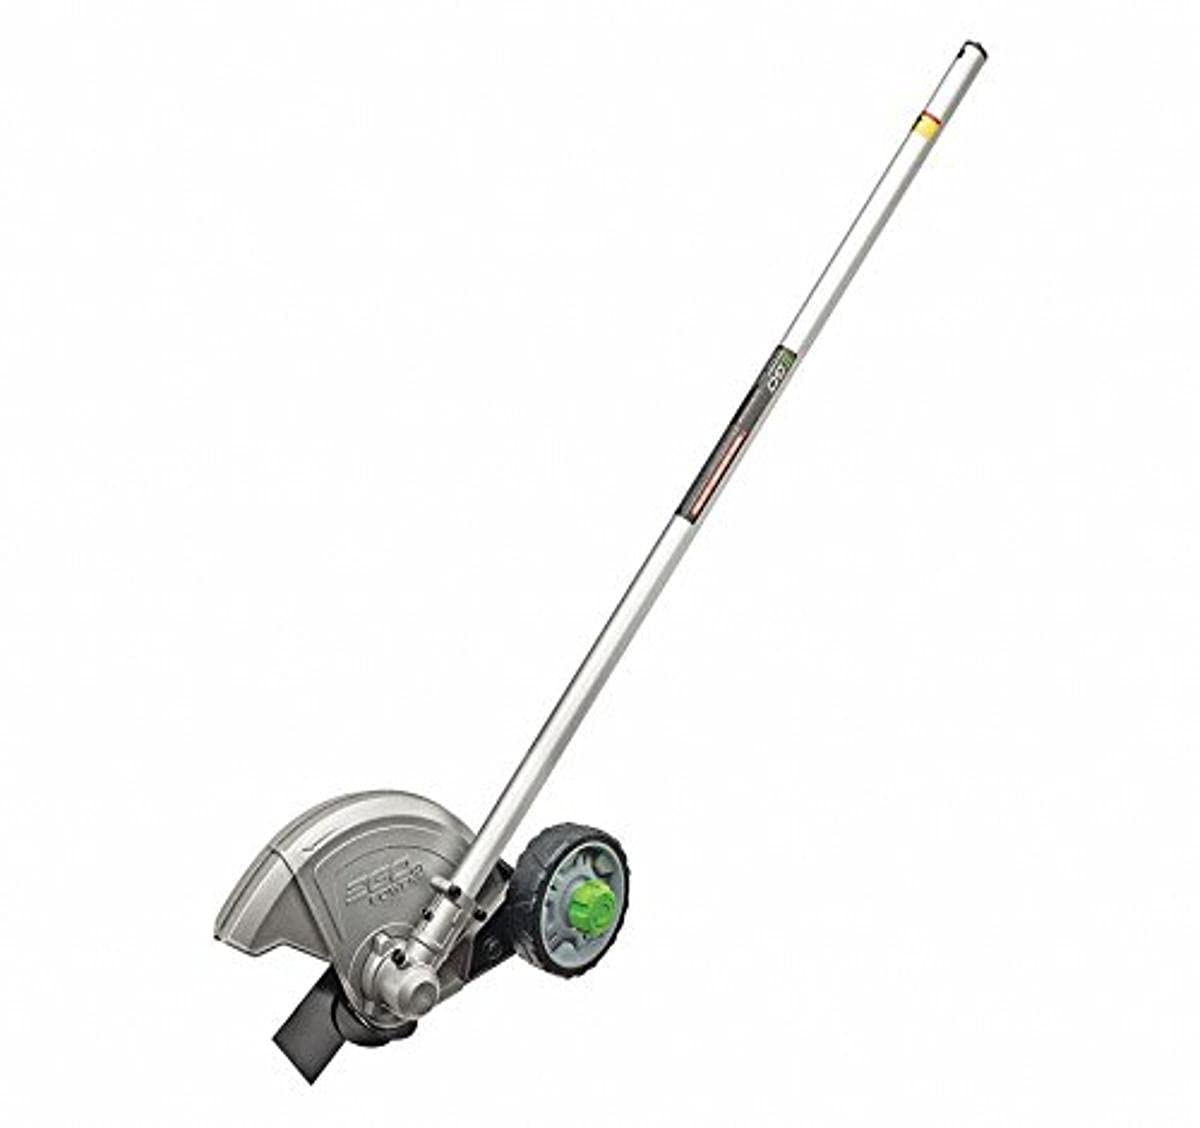 EgO Power EA0800 8-Inch Edger Attachment for EgO 56-Volt Lithium-ion Multi Head System,Silver